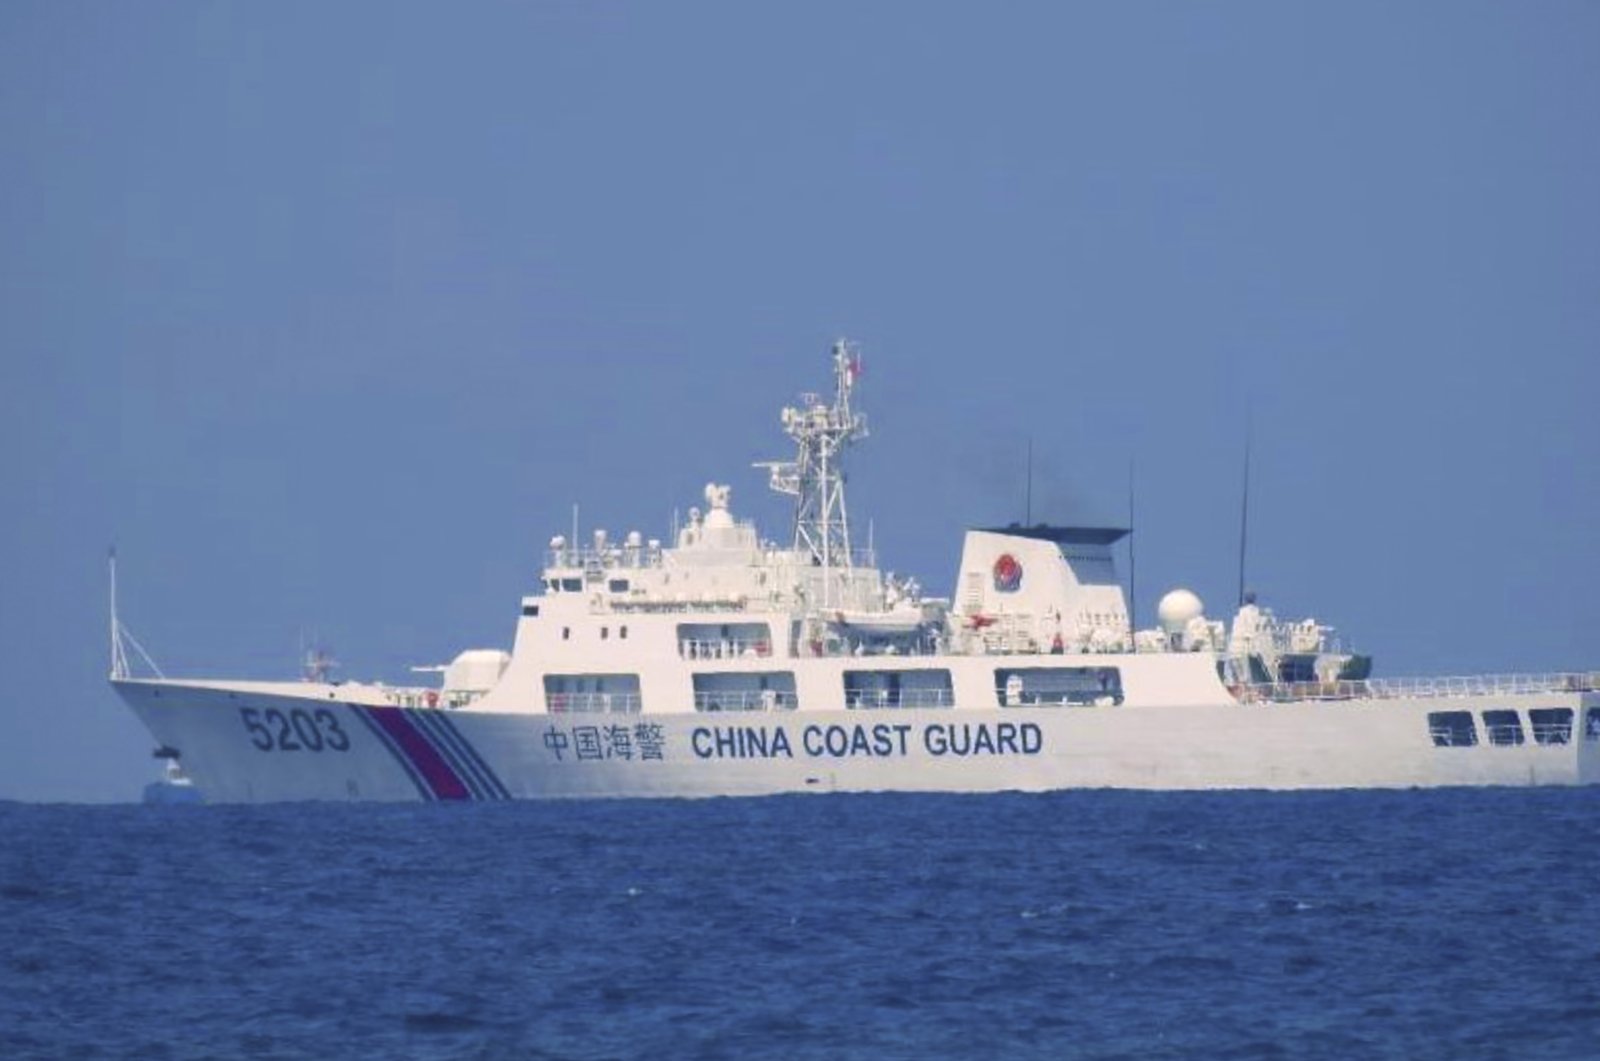 A Chinese coast guard vessel is seen patrolling in the South China Sea, taken sometime on April 13-14, 2021. (AP Photo)